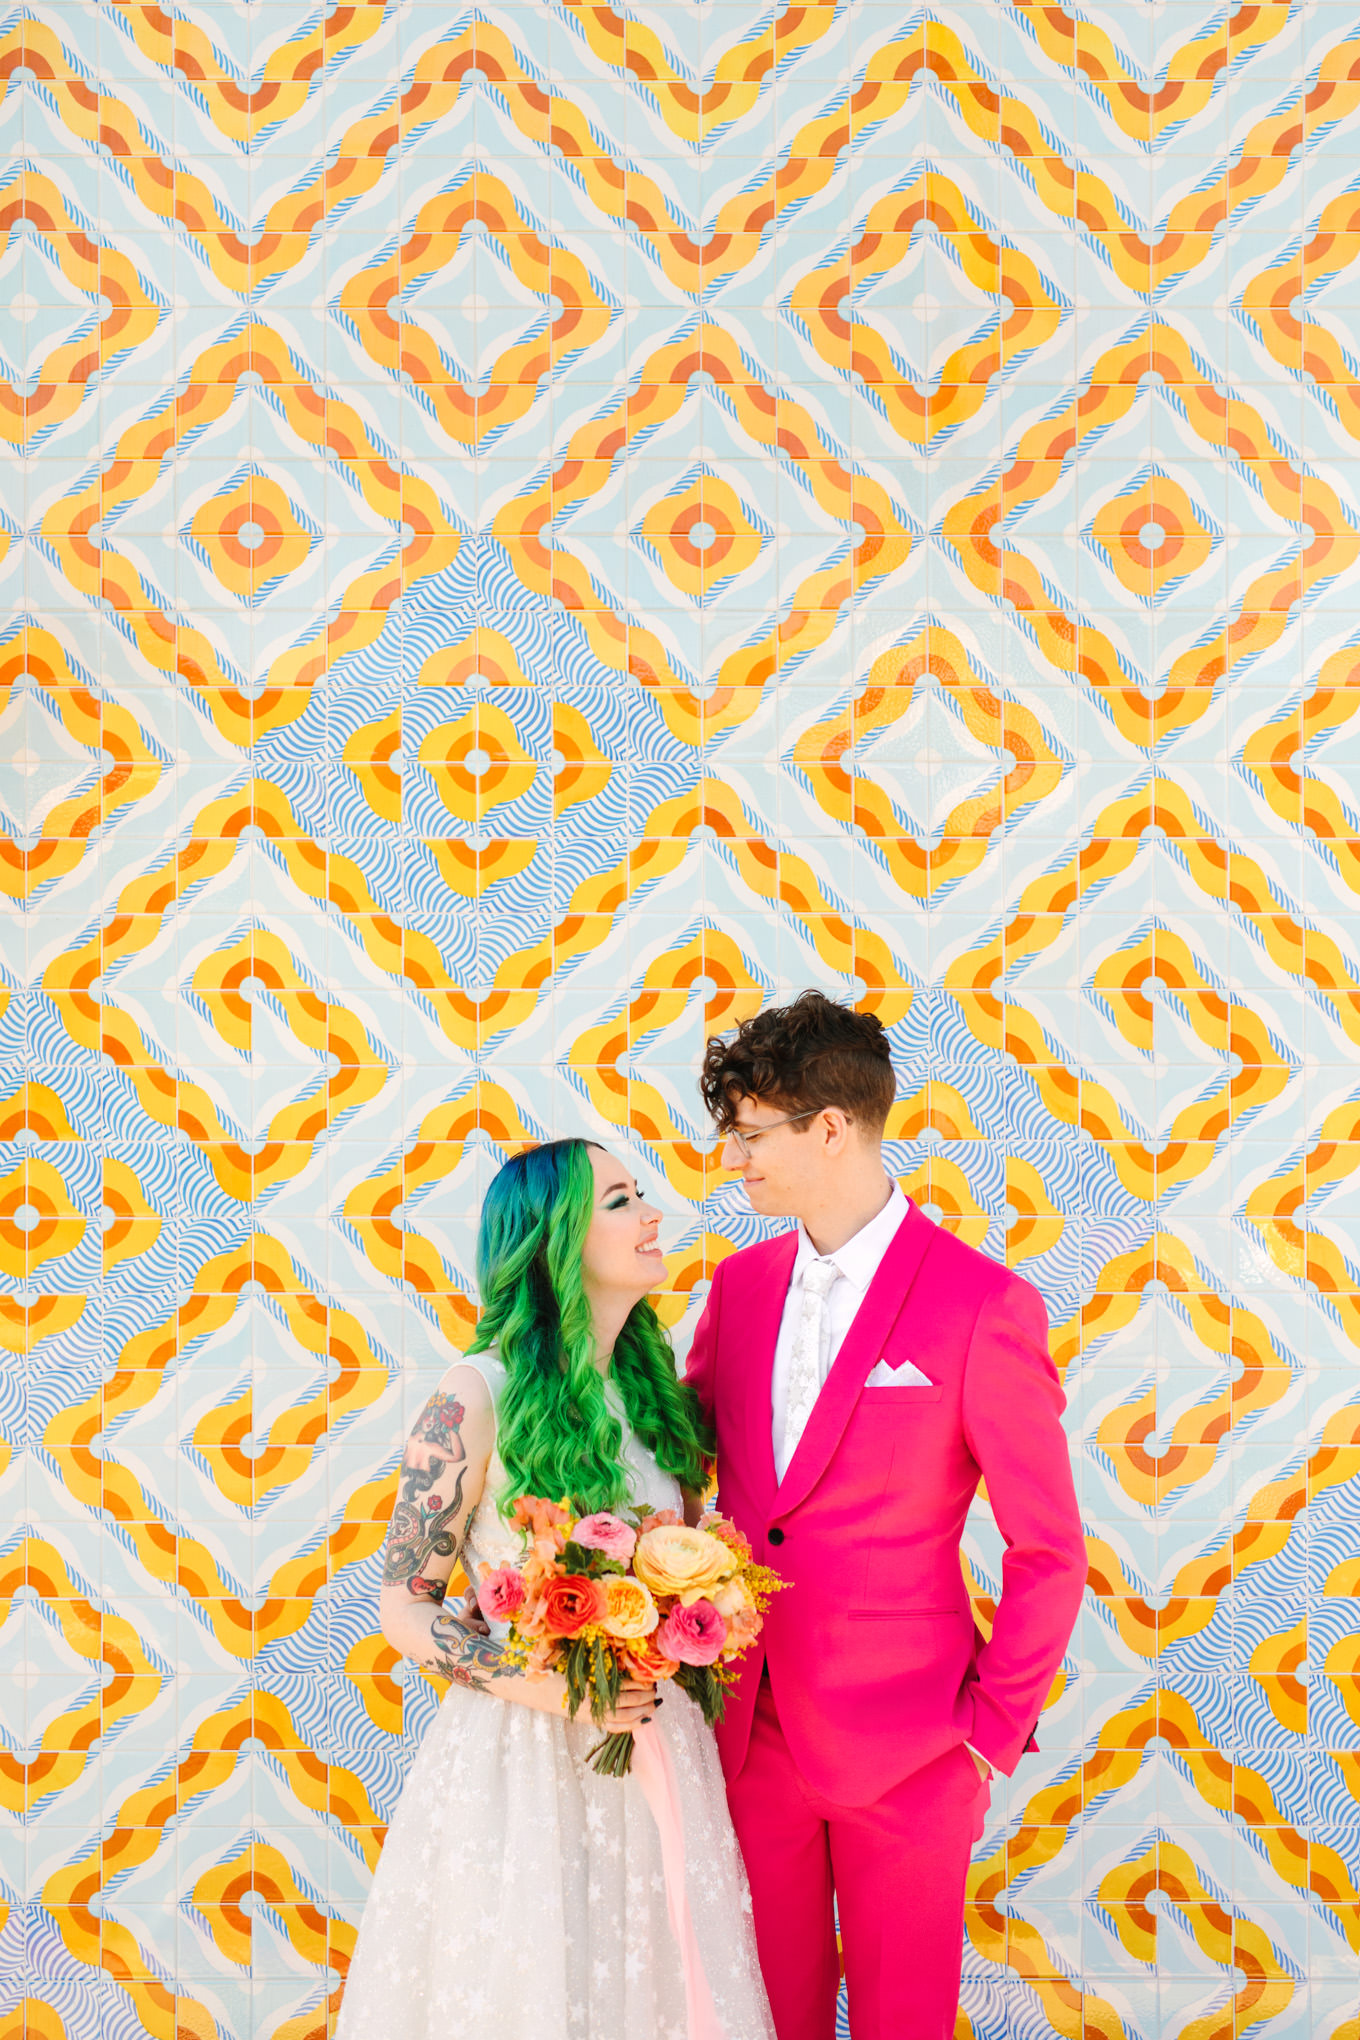 Green hair bride and groom in hot pink suit in front of Bavel DTLA | Colorful wedding at The Unique Space Los Angeles published in The Knot Magazine | Fresh and colorful photography for fun-loving couples in Southern California | #colorfulwedding #losangeleswedding #weddingphotography #uniquespace Source: Mary Costa Photography | Los Angeles